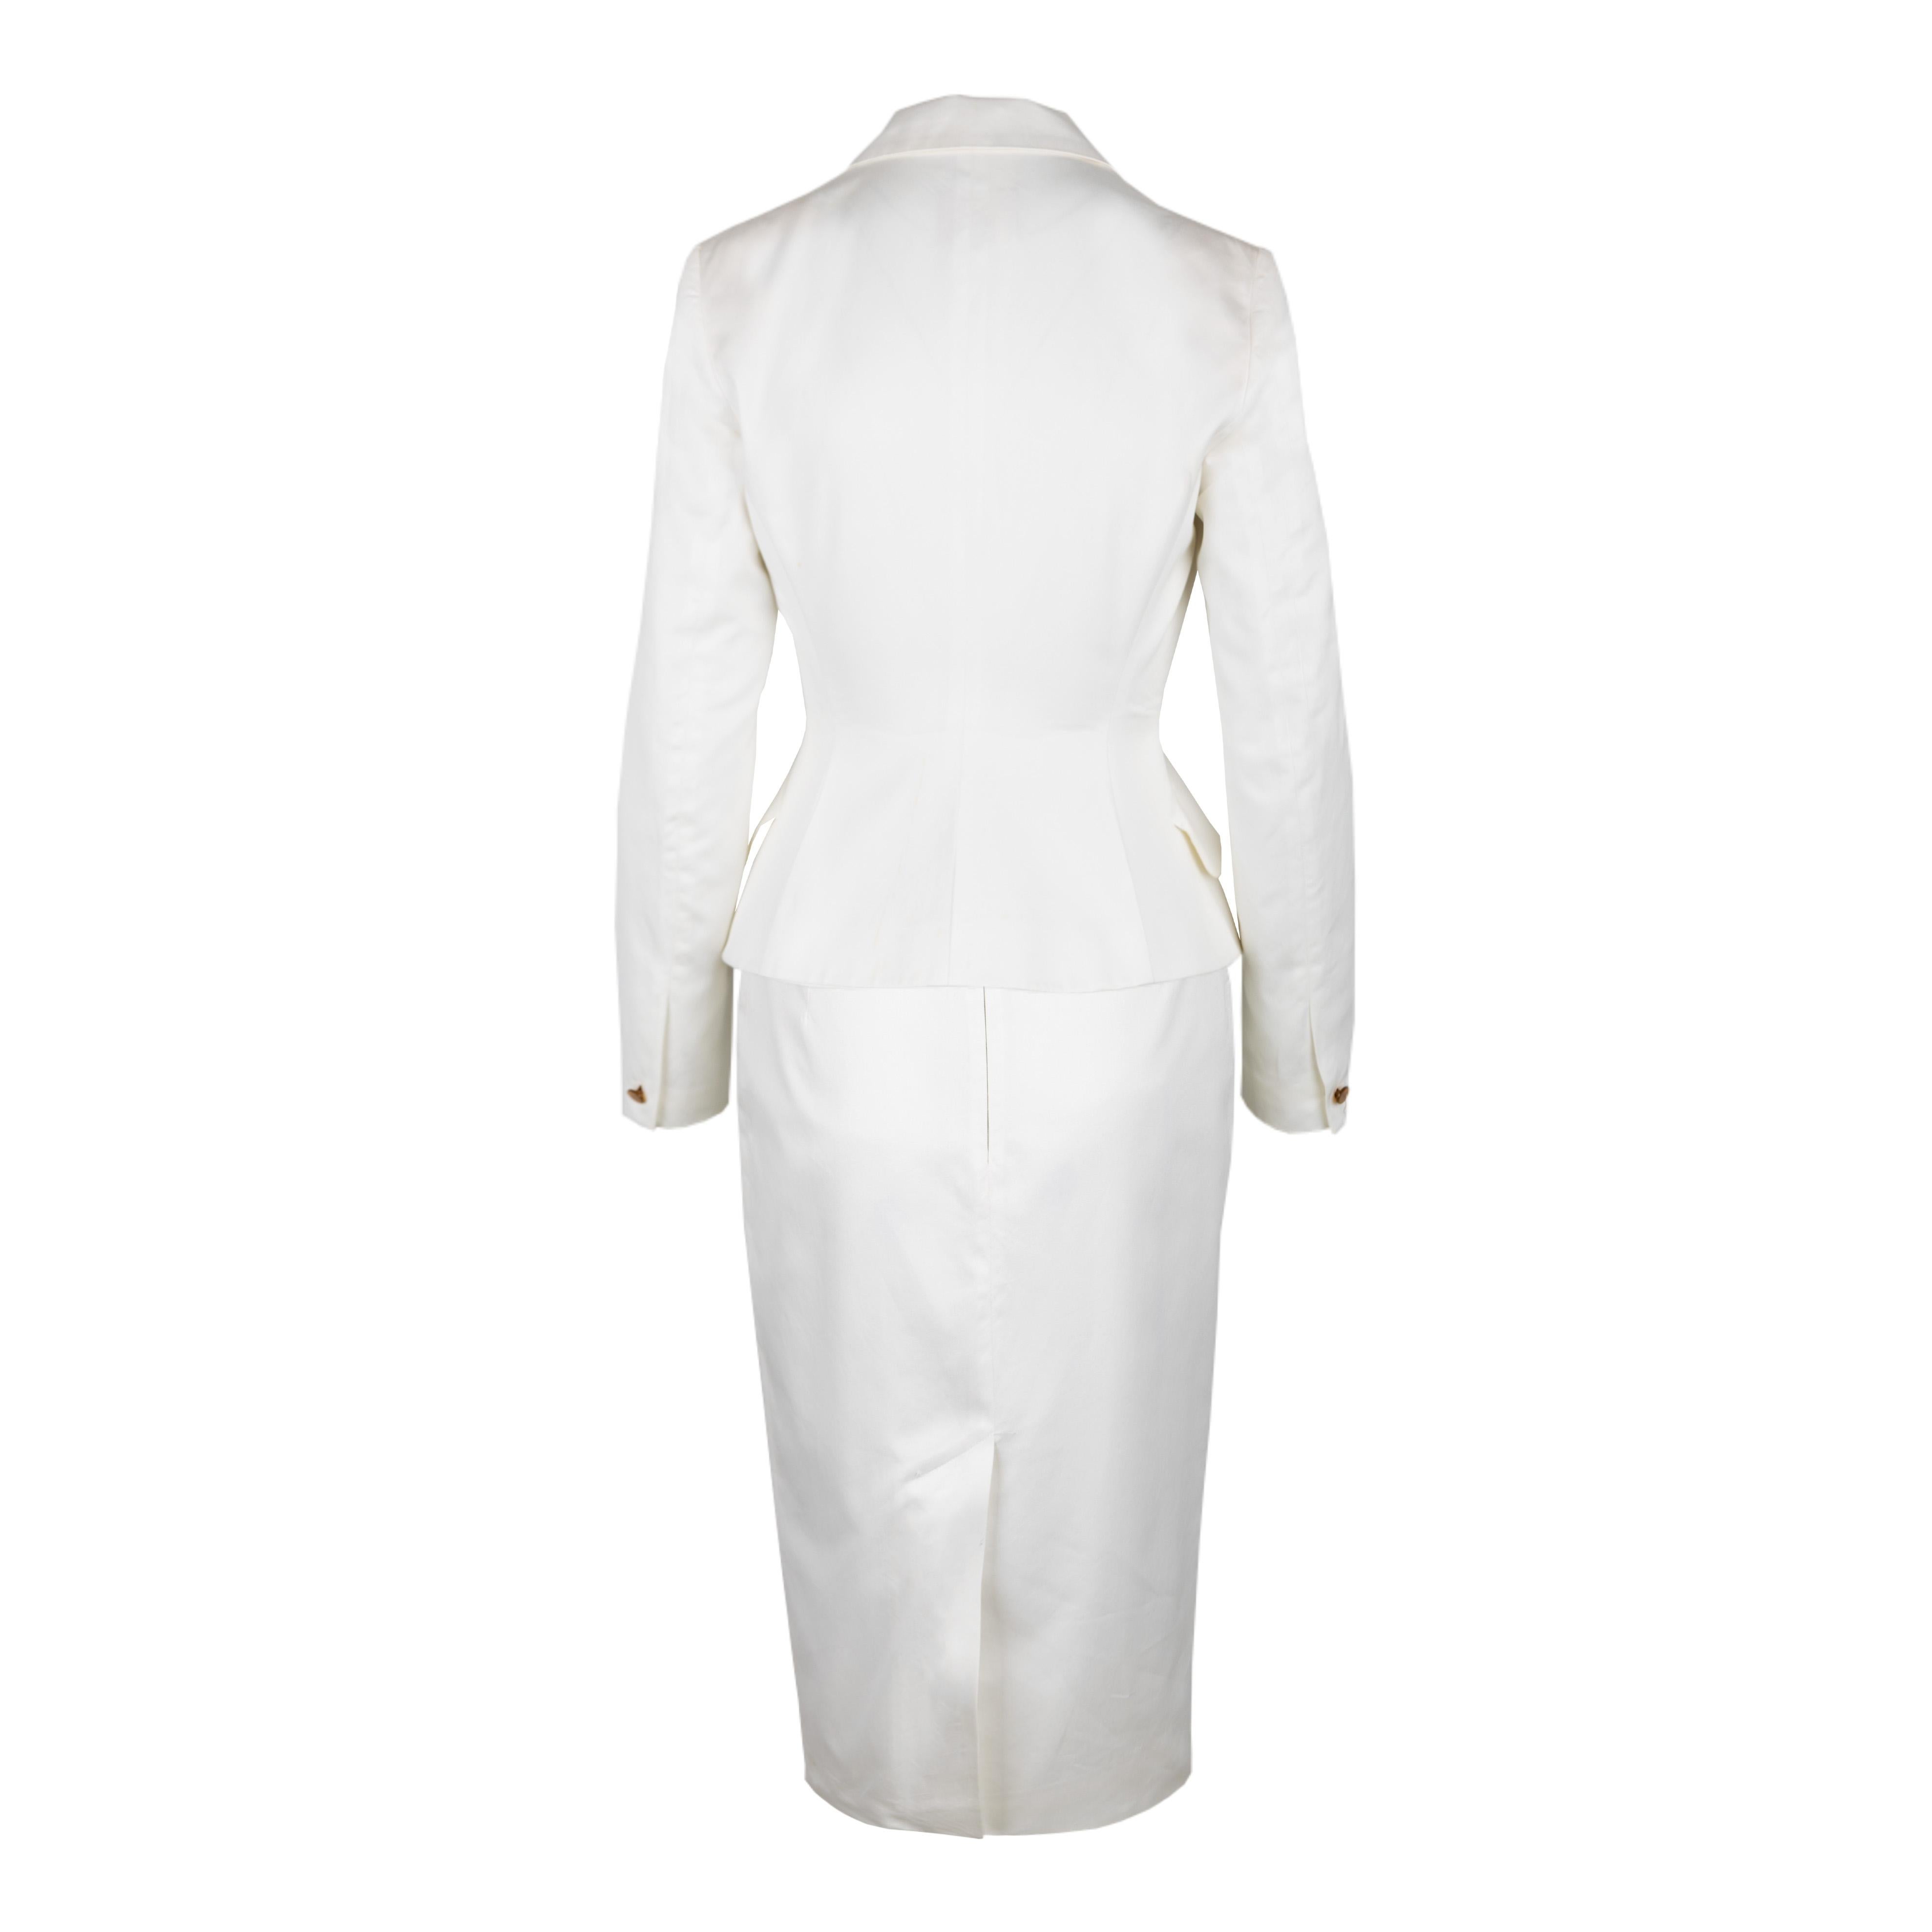 Vivienne Westwood red label skirt and jacket set in white, featuring a cinched waist that adds a flattering shape to the silhouette. The jacket has two logo embossed buttons and two front pockets that are sewn into the garment. The skirt has a short